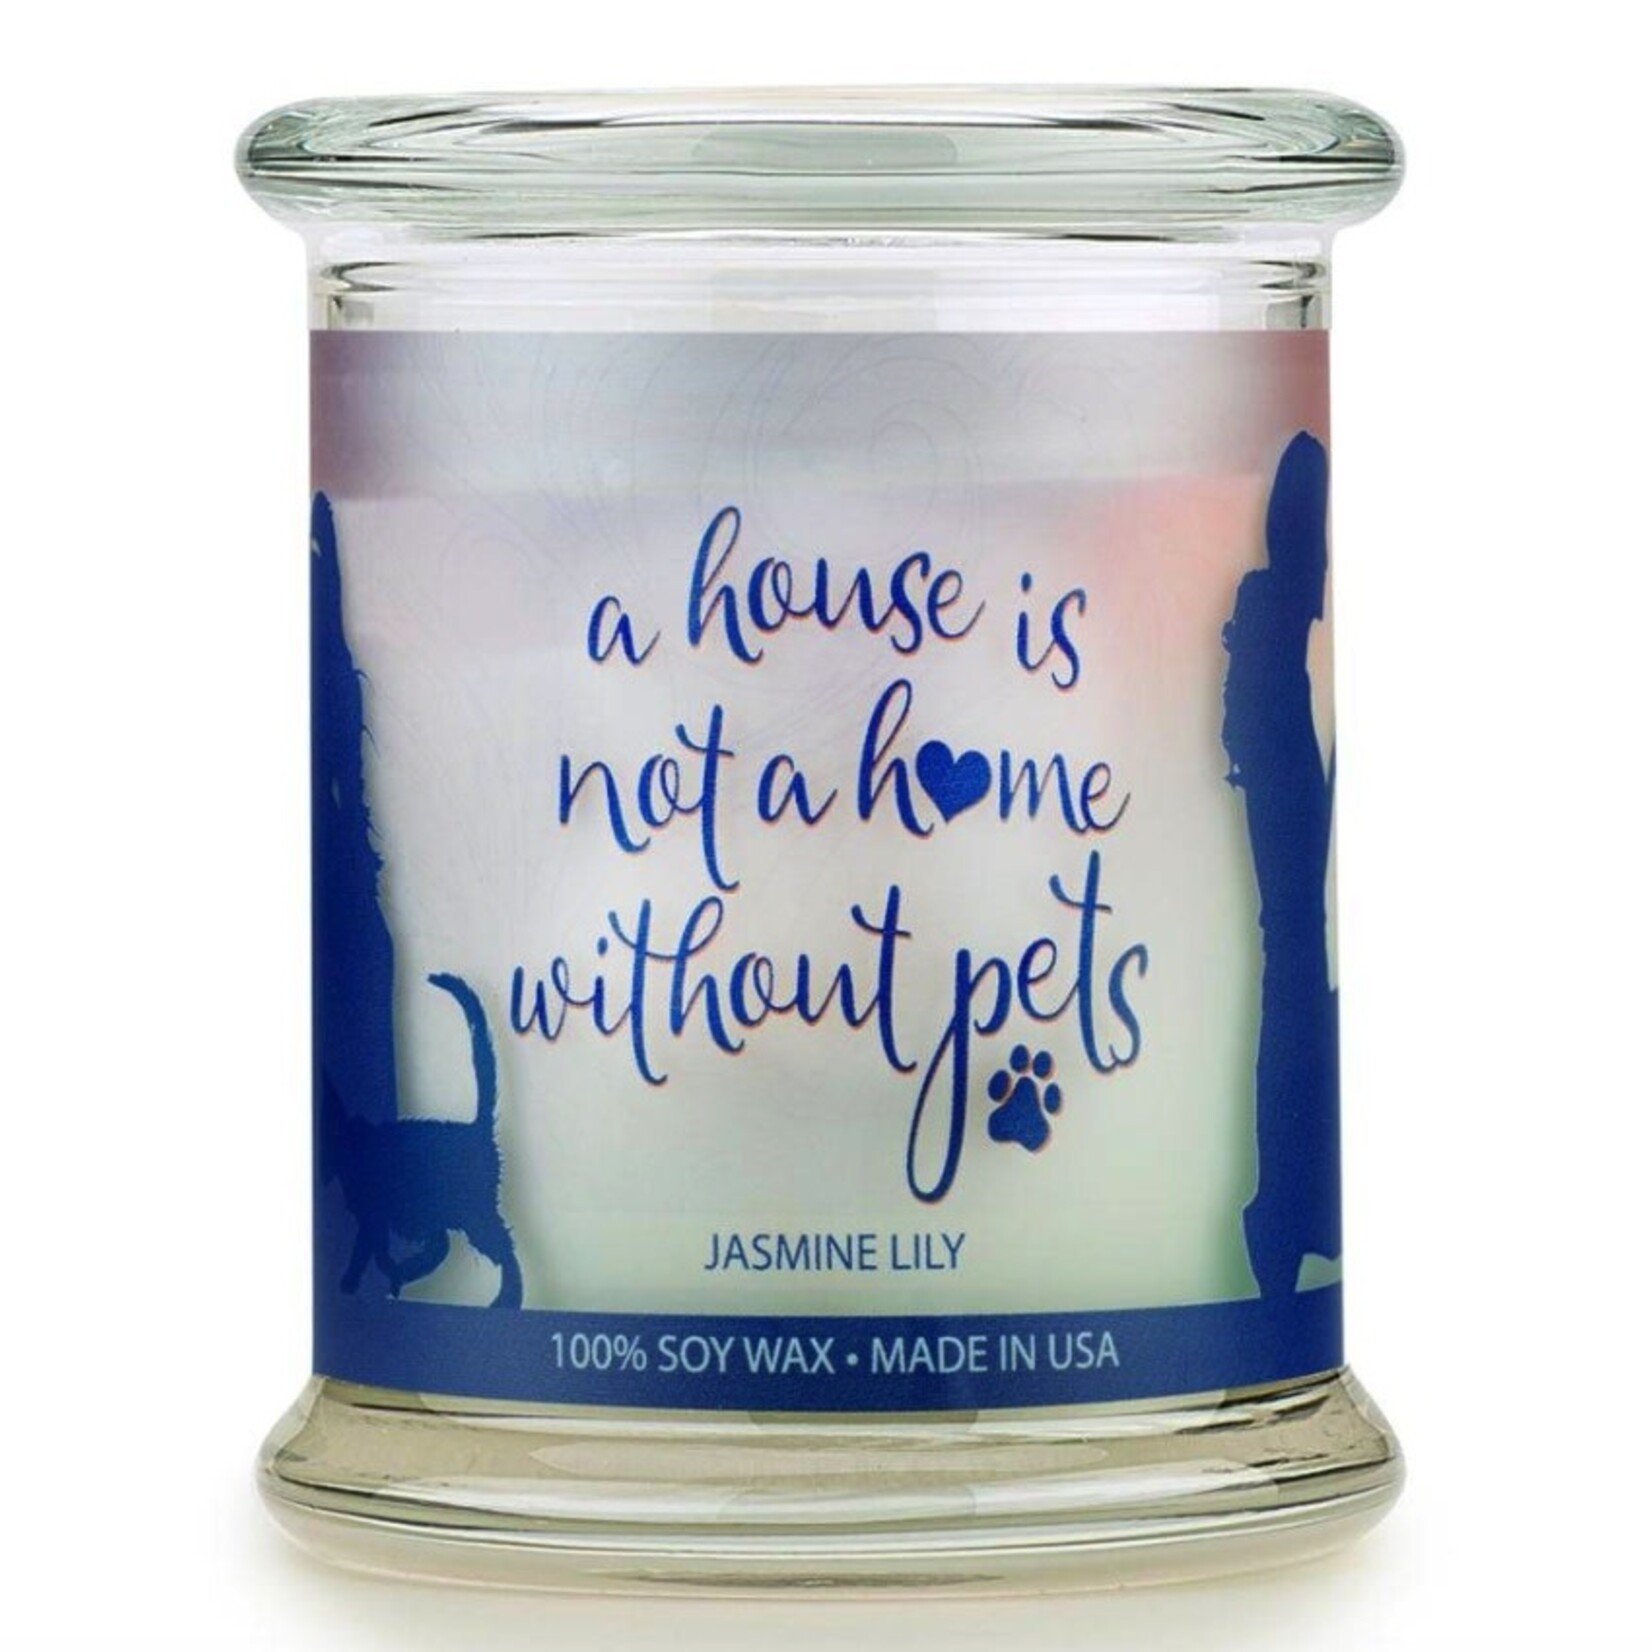 PET HOUSE CANDLE Pet house Candle